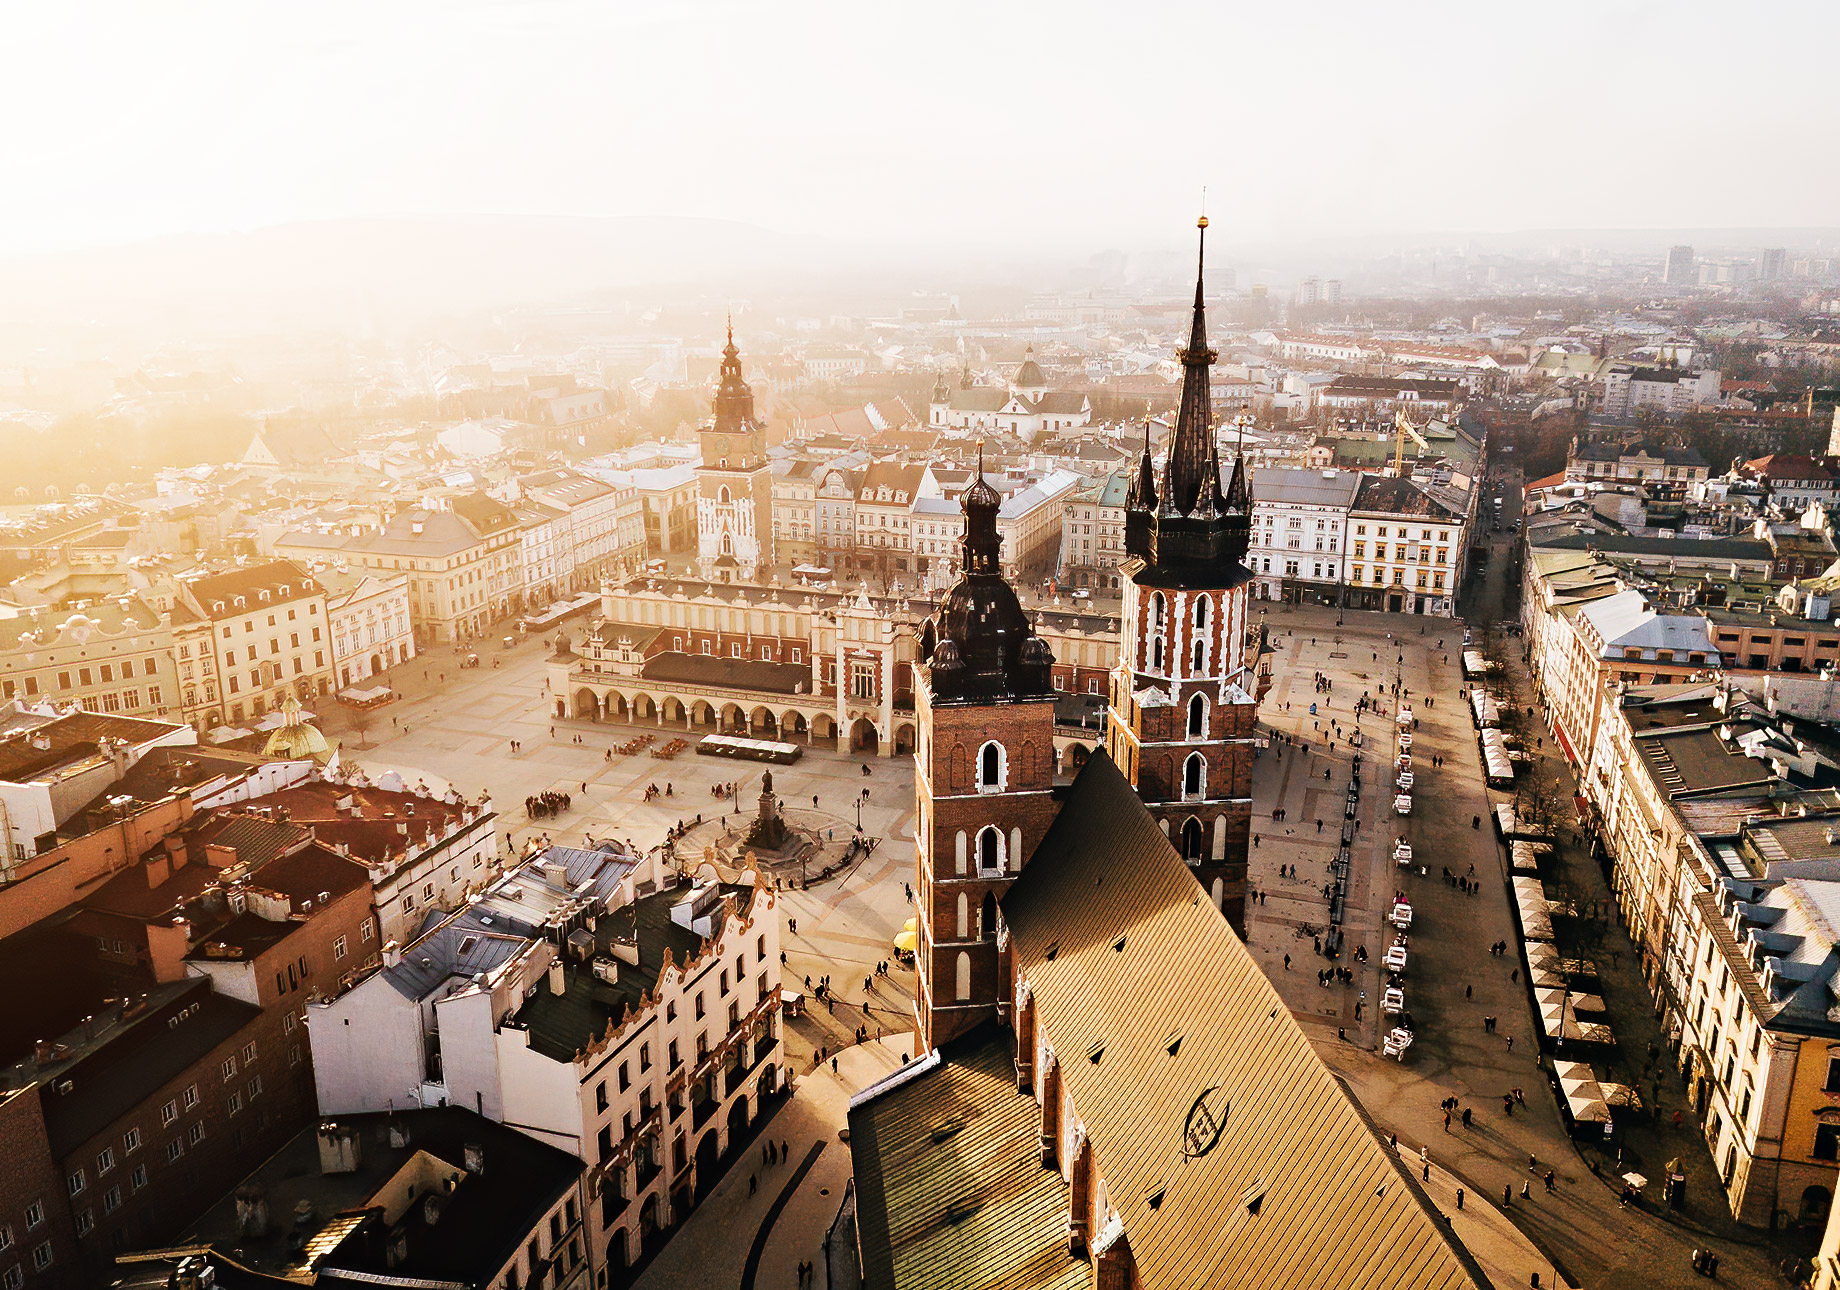 Kraków, Poland: A City of History and Culture